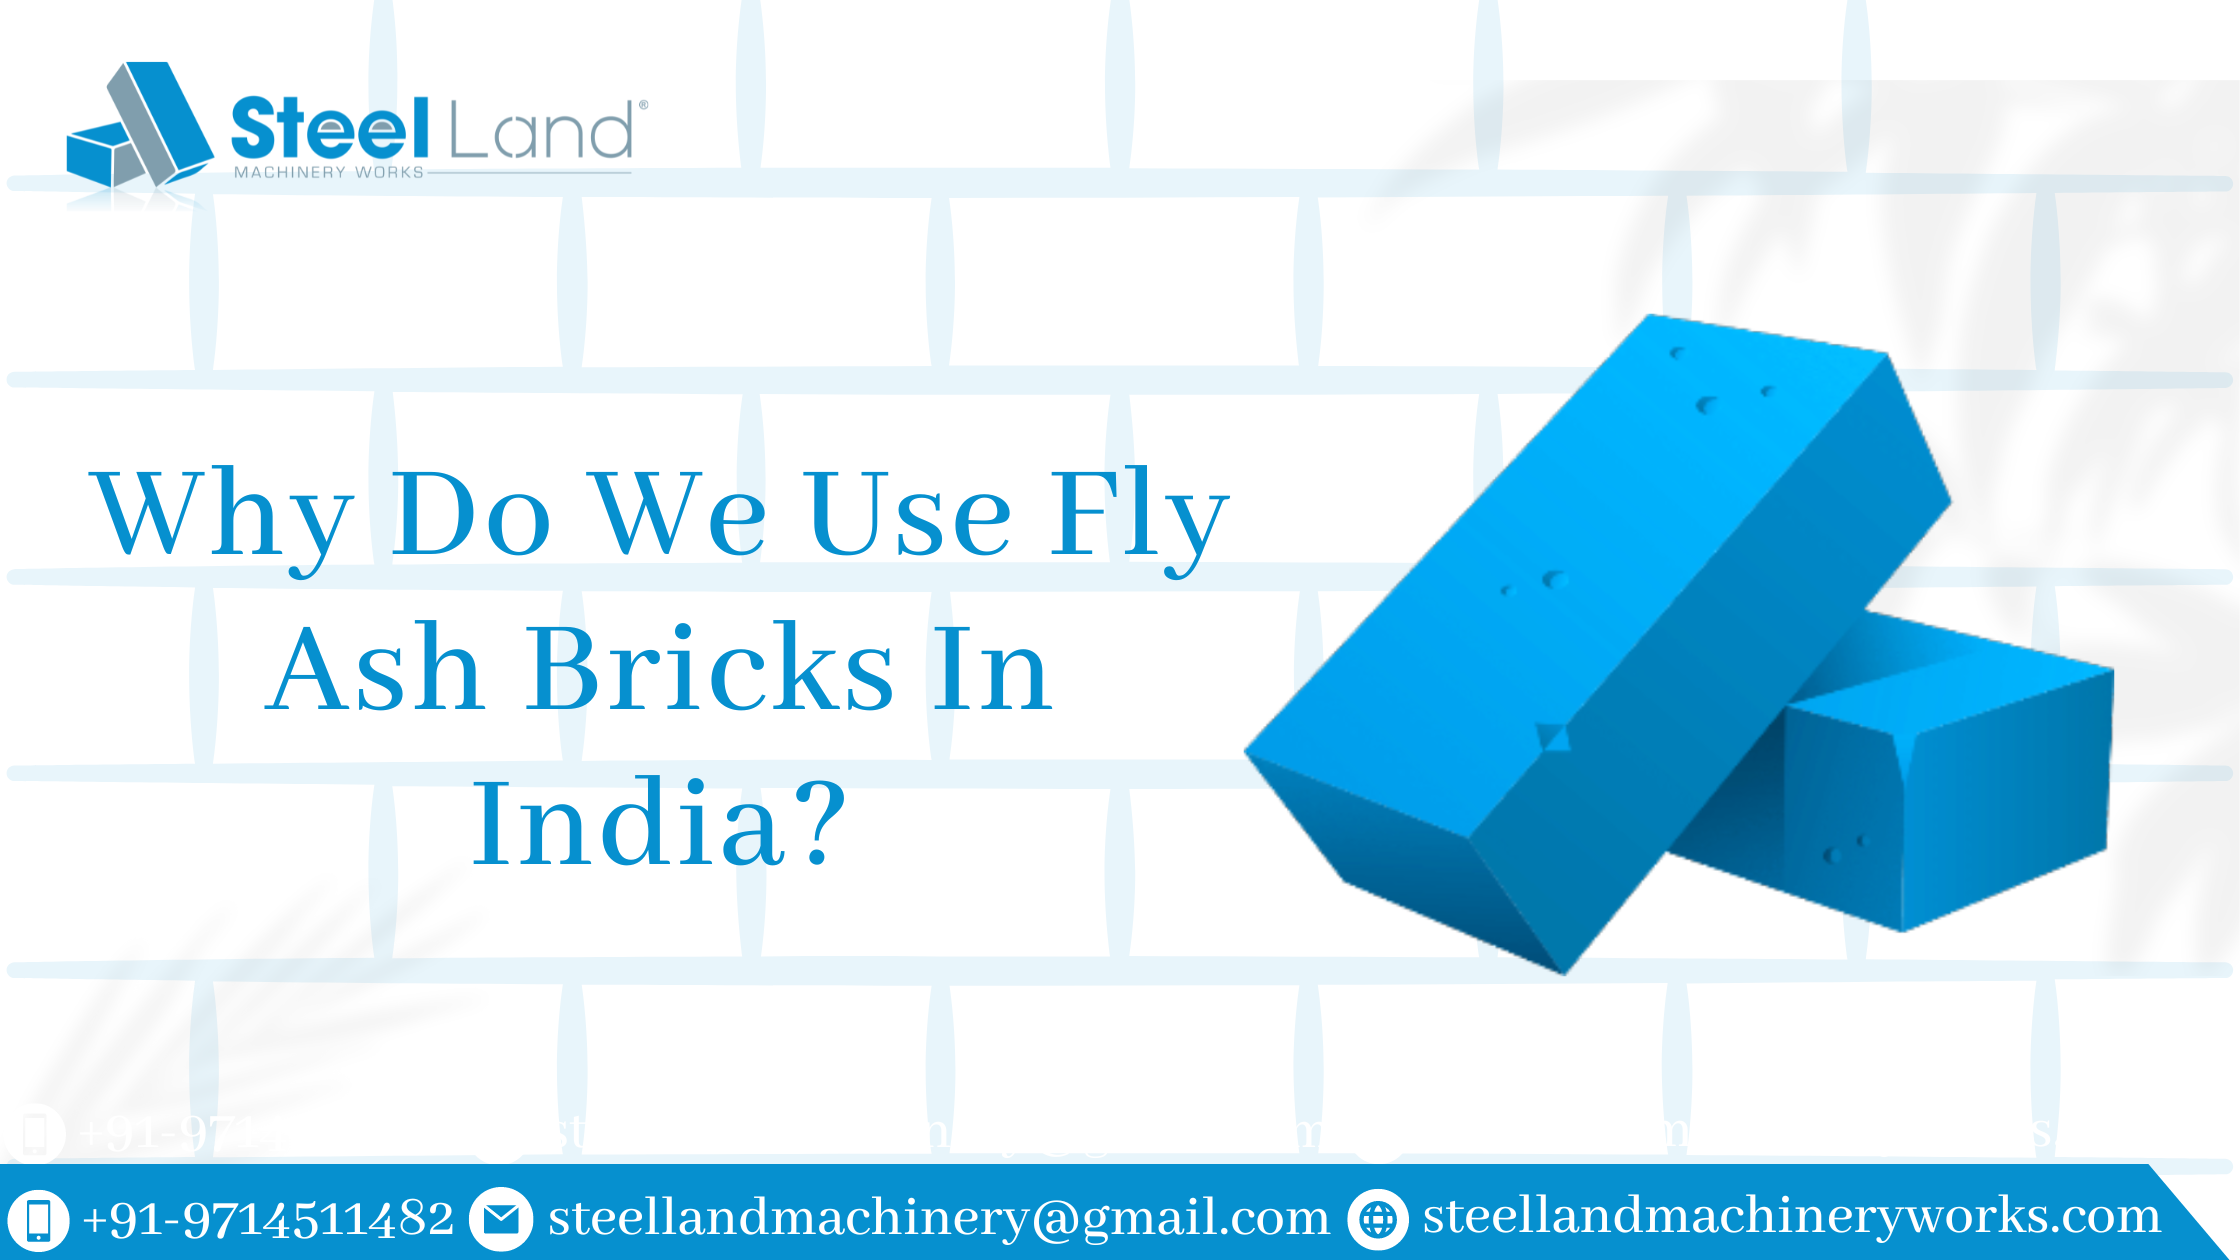 Why Do We Use Fly Ash Bricks In India?